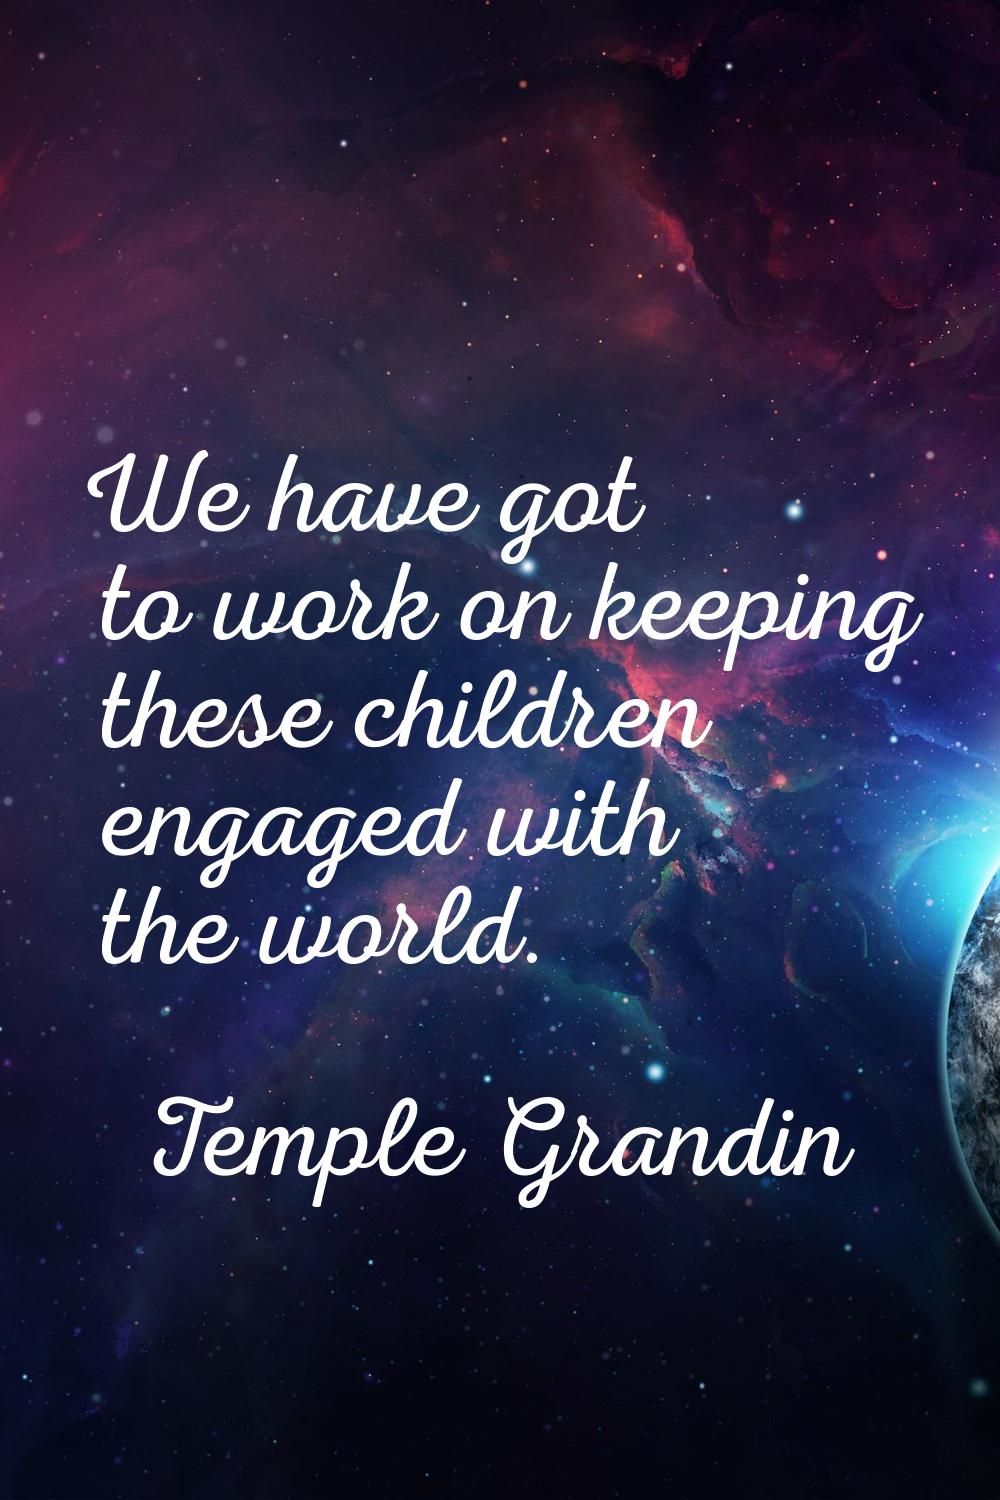 We have got to work on keeping these children engaged with the world.